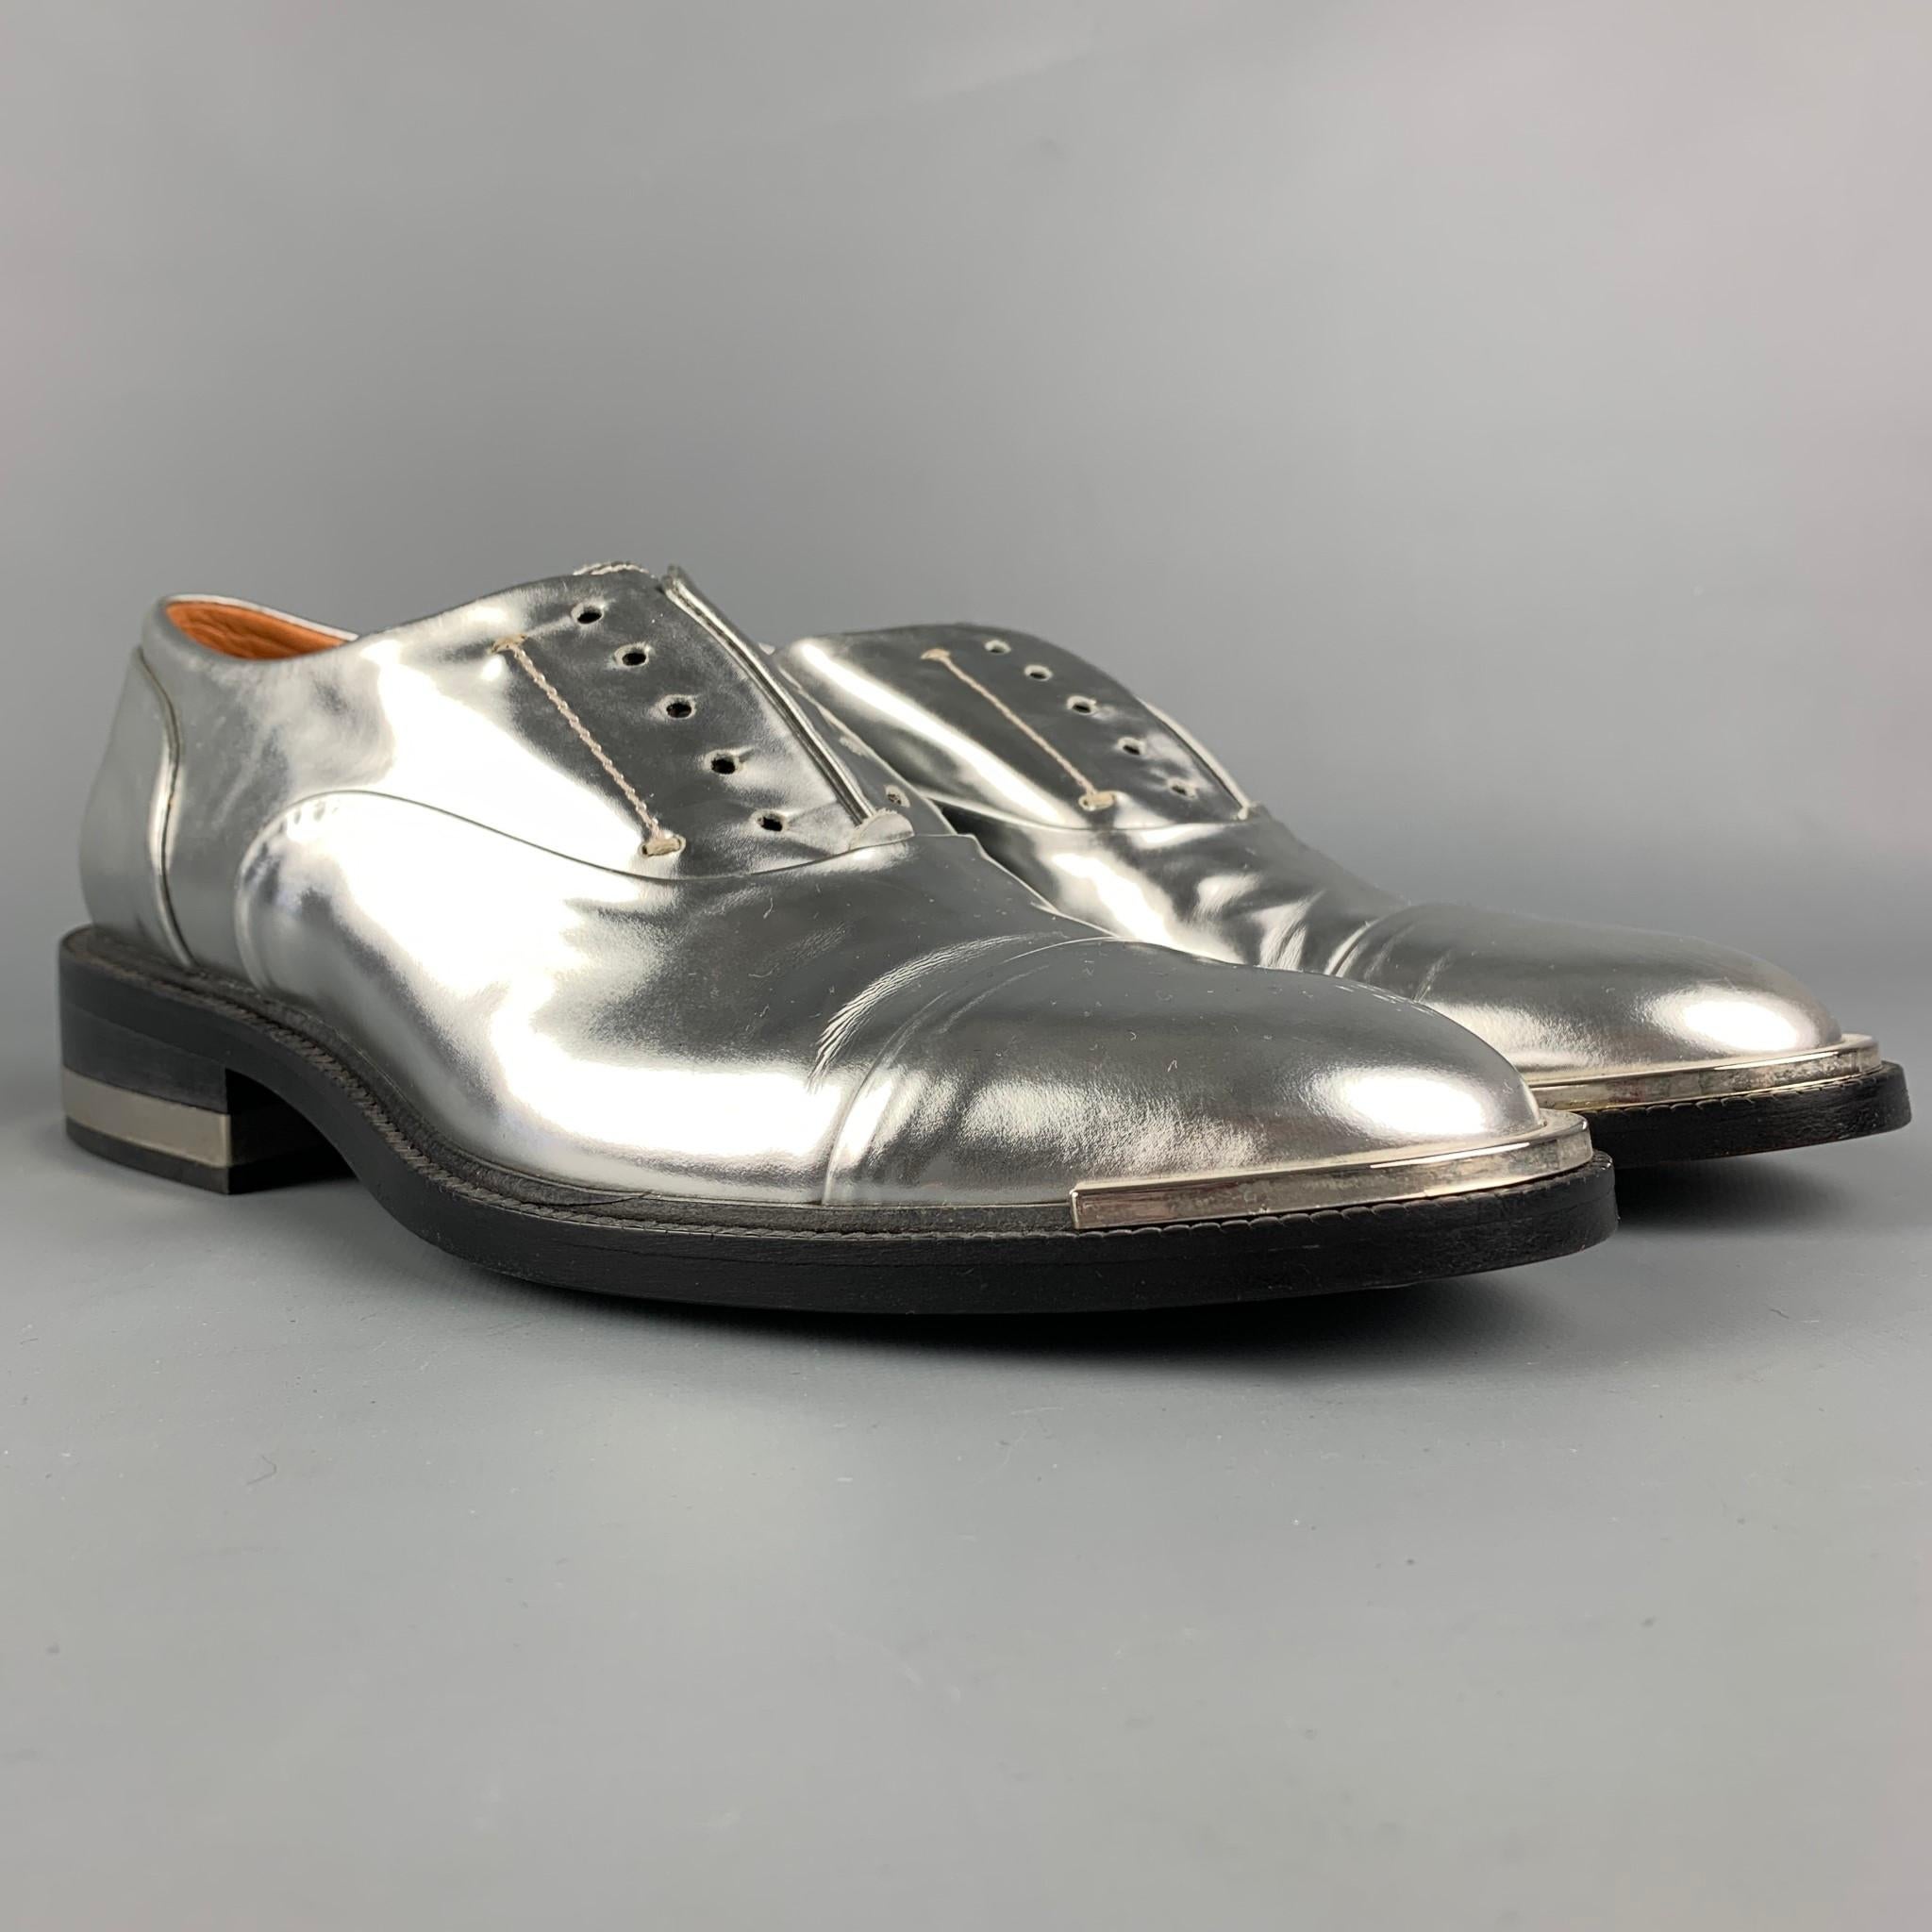 BARBARA BUI shoes comes in a silver metallic leather featuring a cap toe, metal trim, and a laceless style. 

Very Good Pre-Owned Condition.
Marked: 37
Original Retail Price: $590.00

Outsole: 10.5 in. x 3.75 in. 